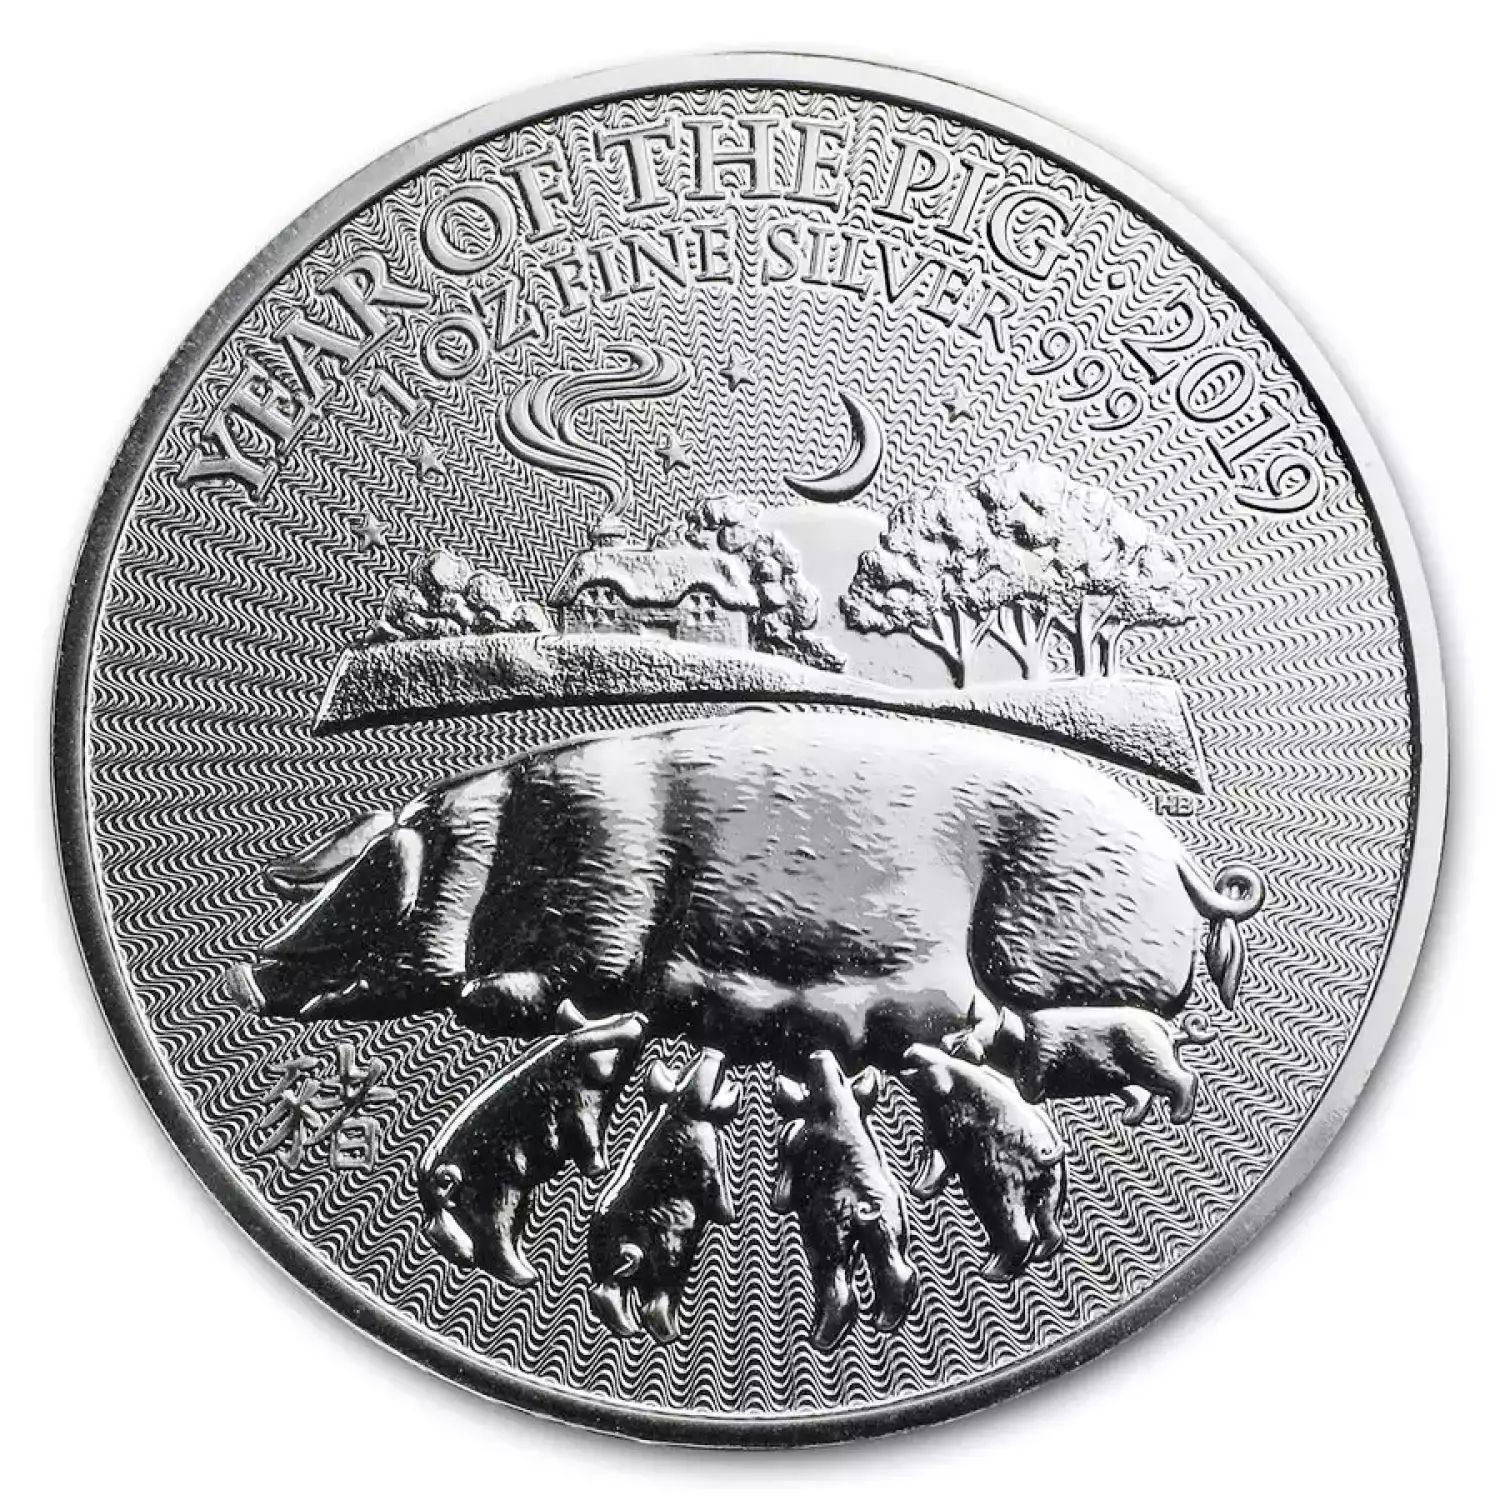 2019 UK year of the pig 2 Pounds silver coin (1)